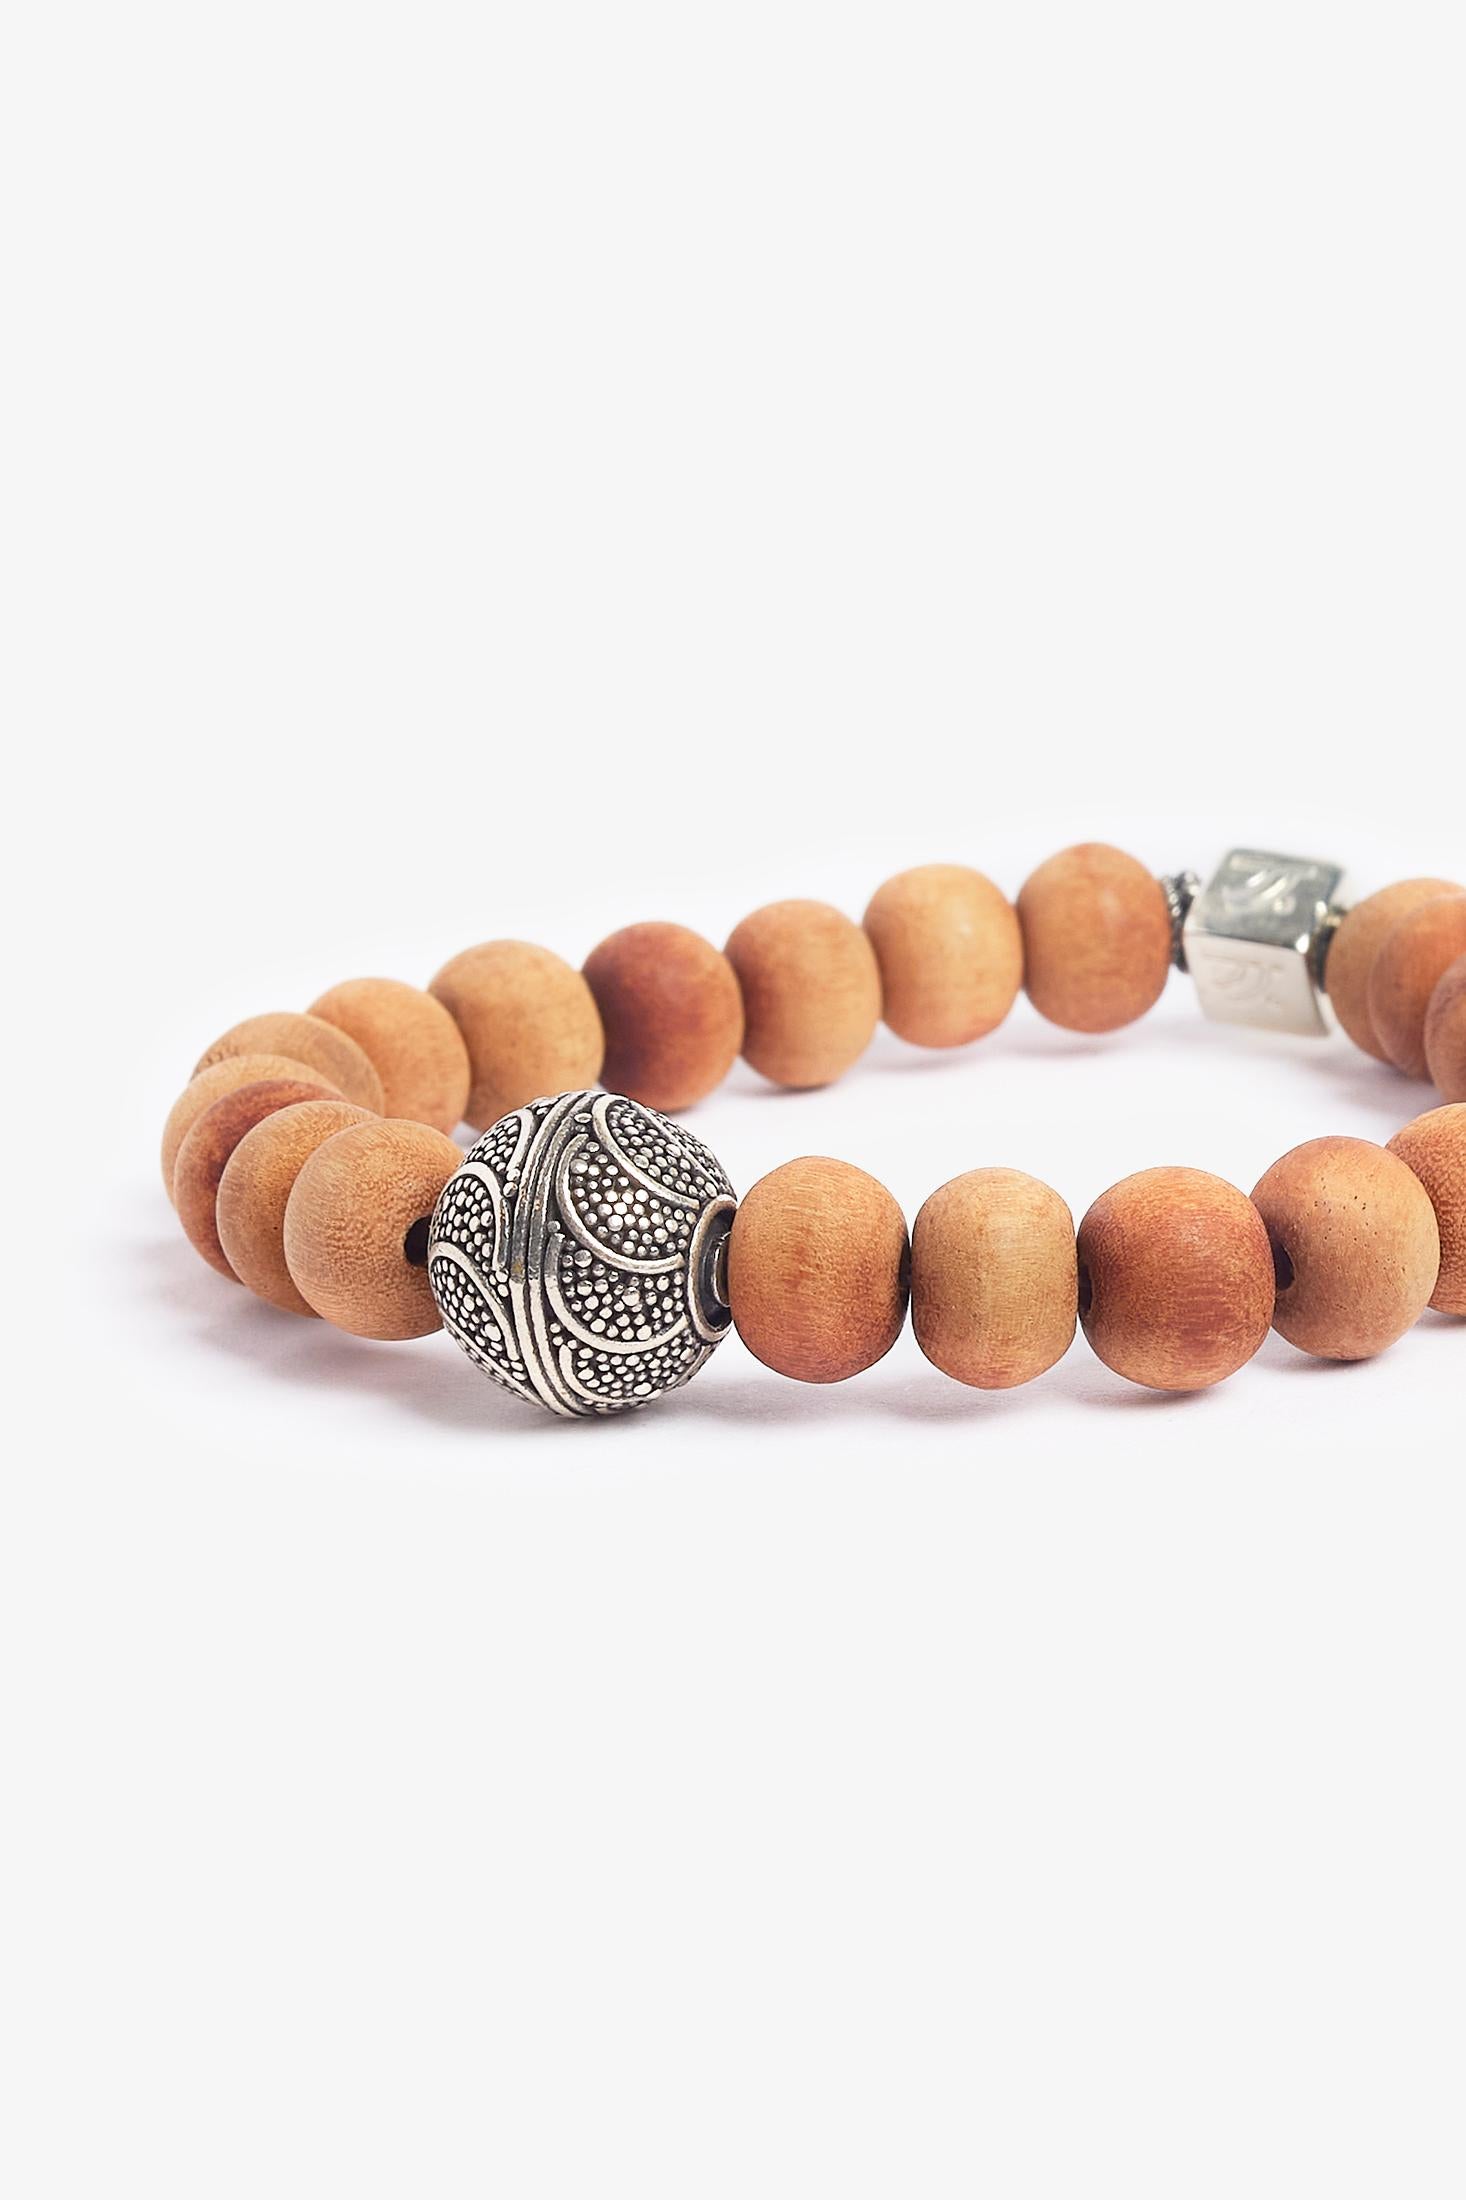 Properties
Happy buddha was made during the designer's travels to Bali.  The sandalwood was bought in a small market outside of Ubud, Bali.  The bracelet is representative of Bali with the use of wood and bamboo throughout their architecture.  Be